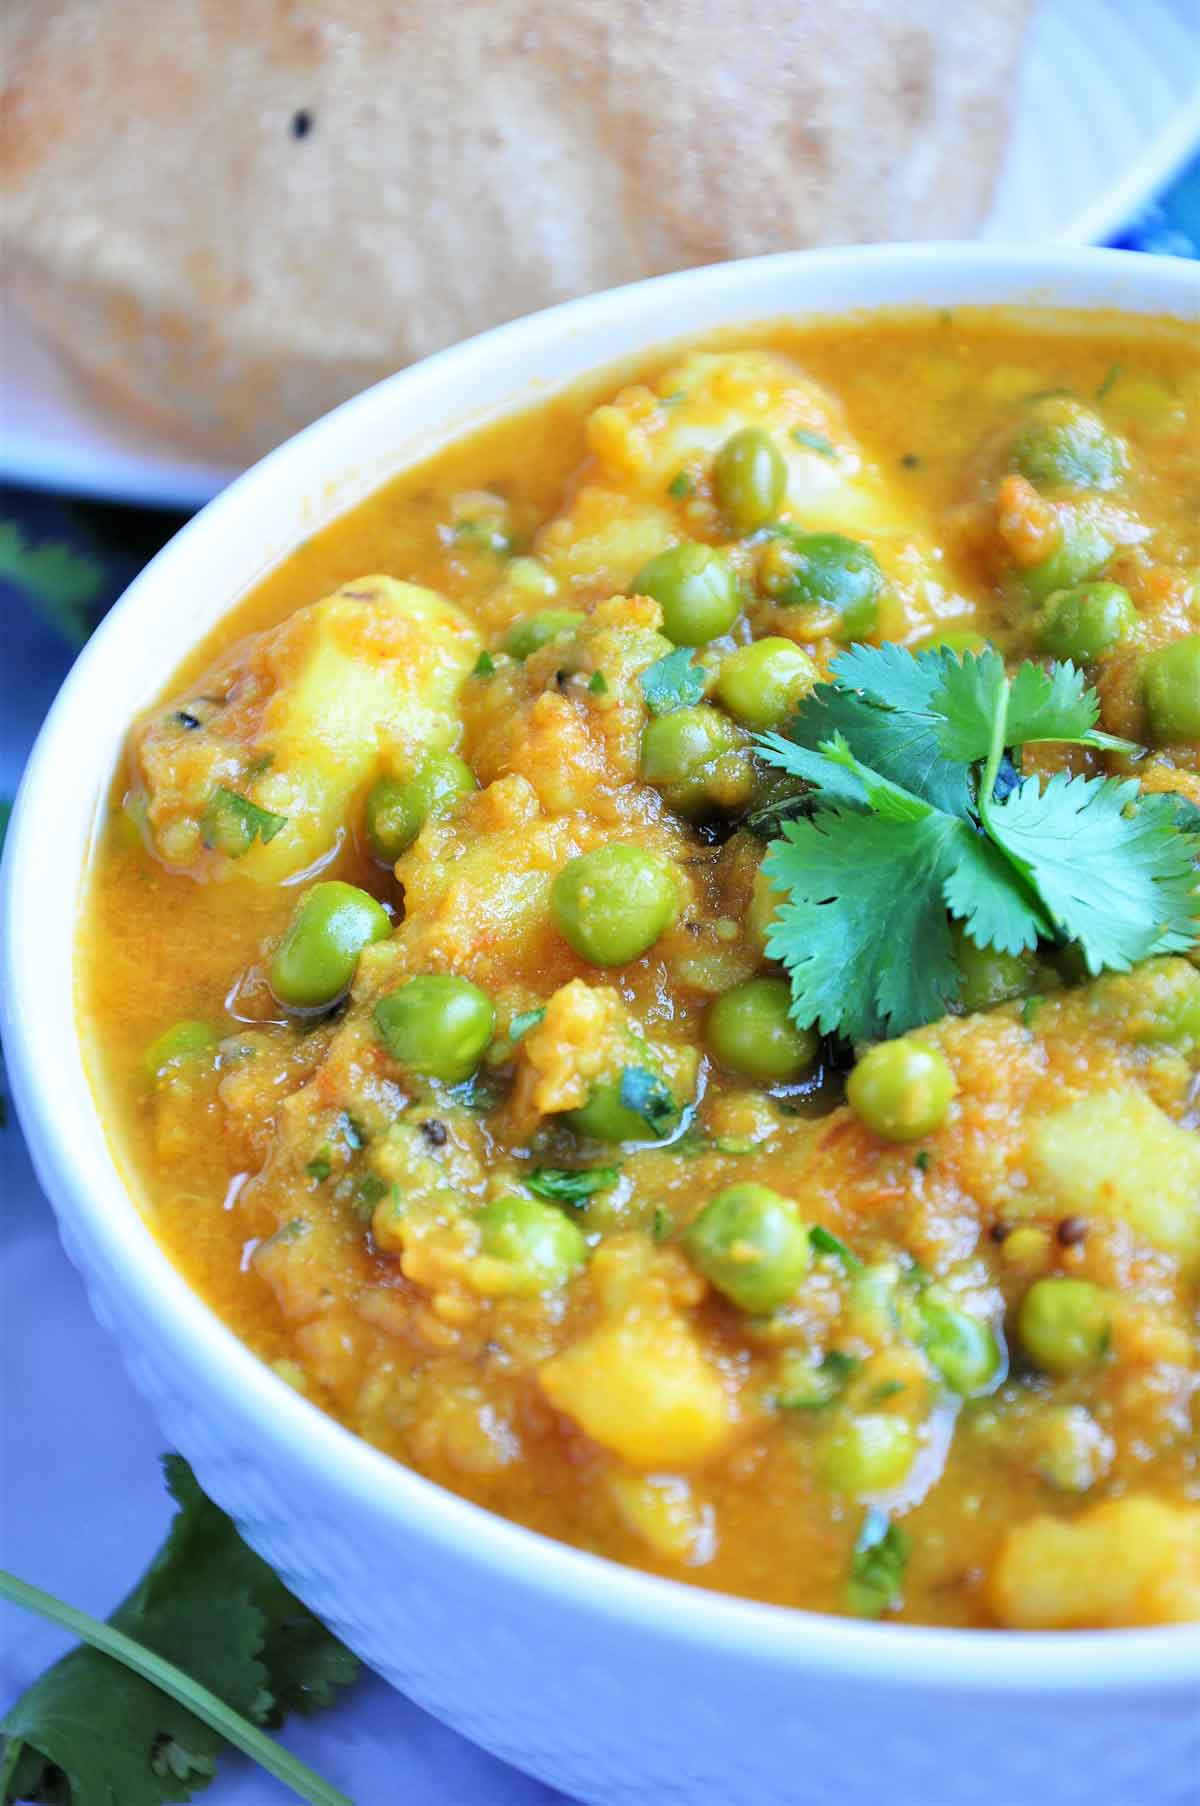 Potato and peas curry served in a bowl.